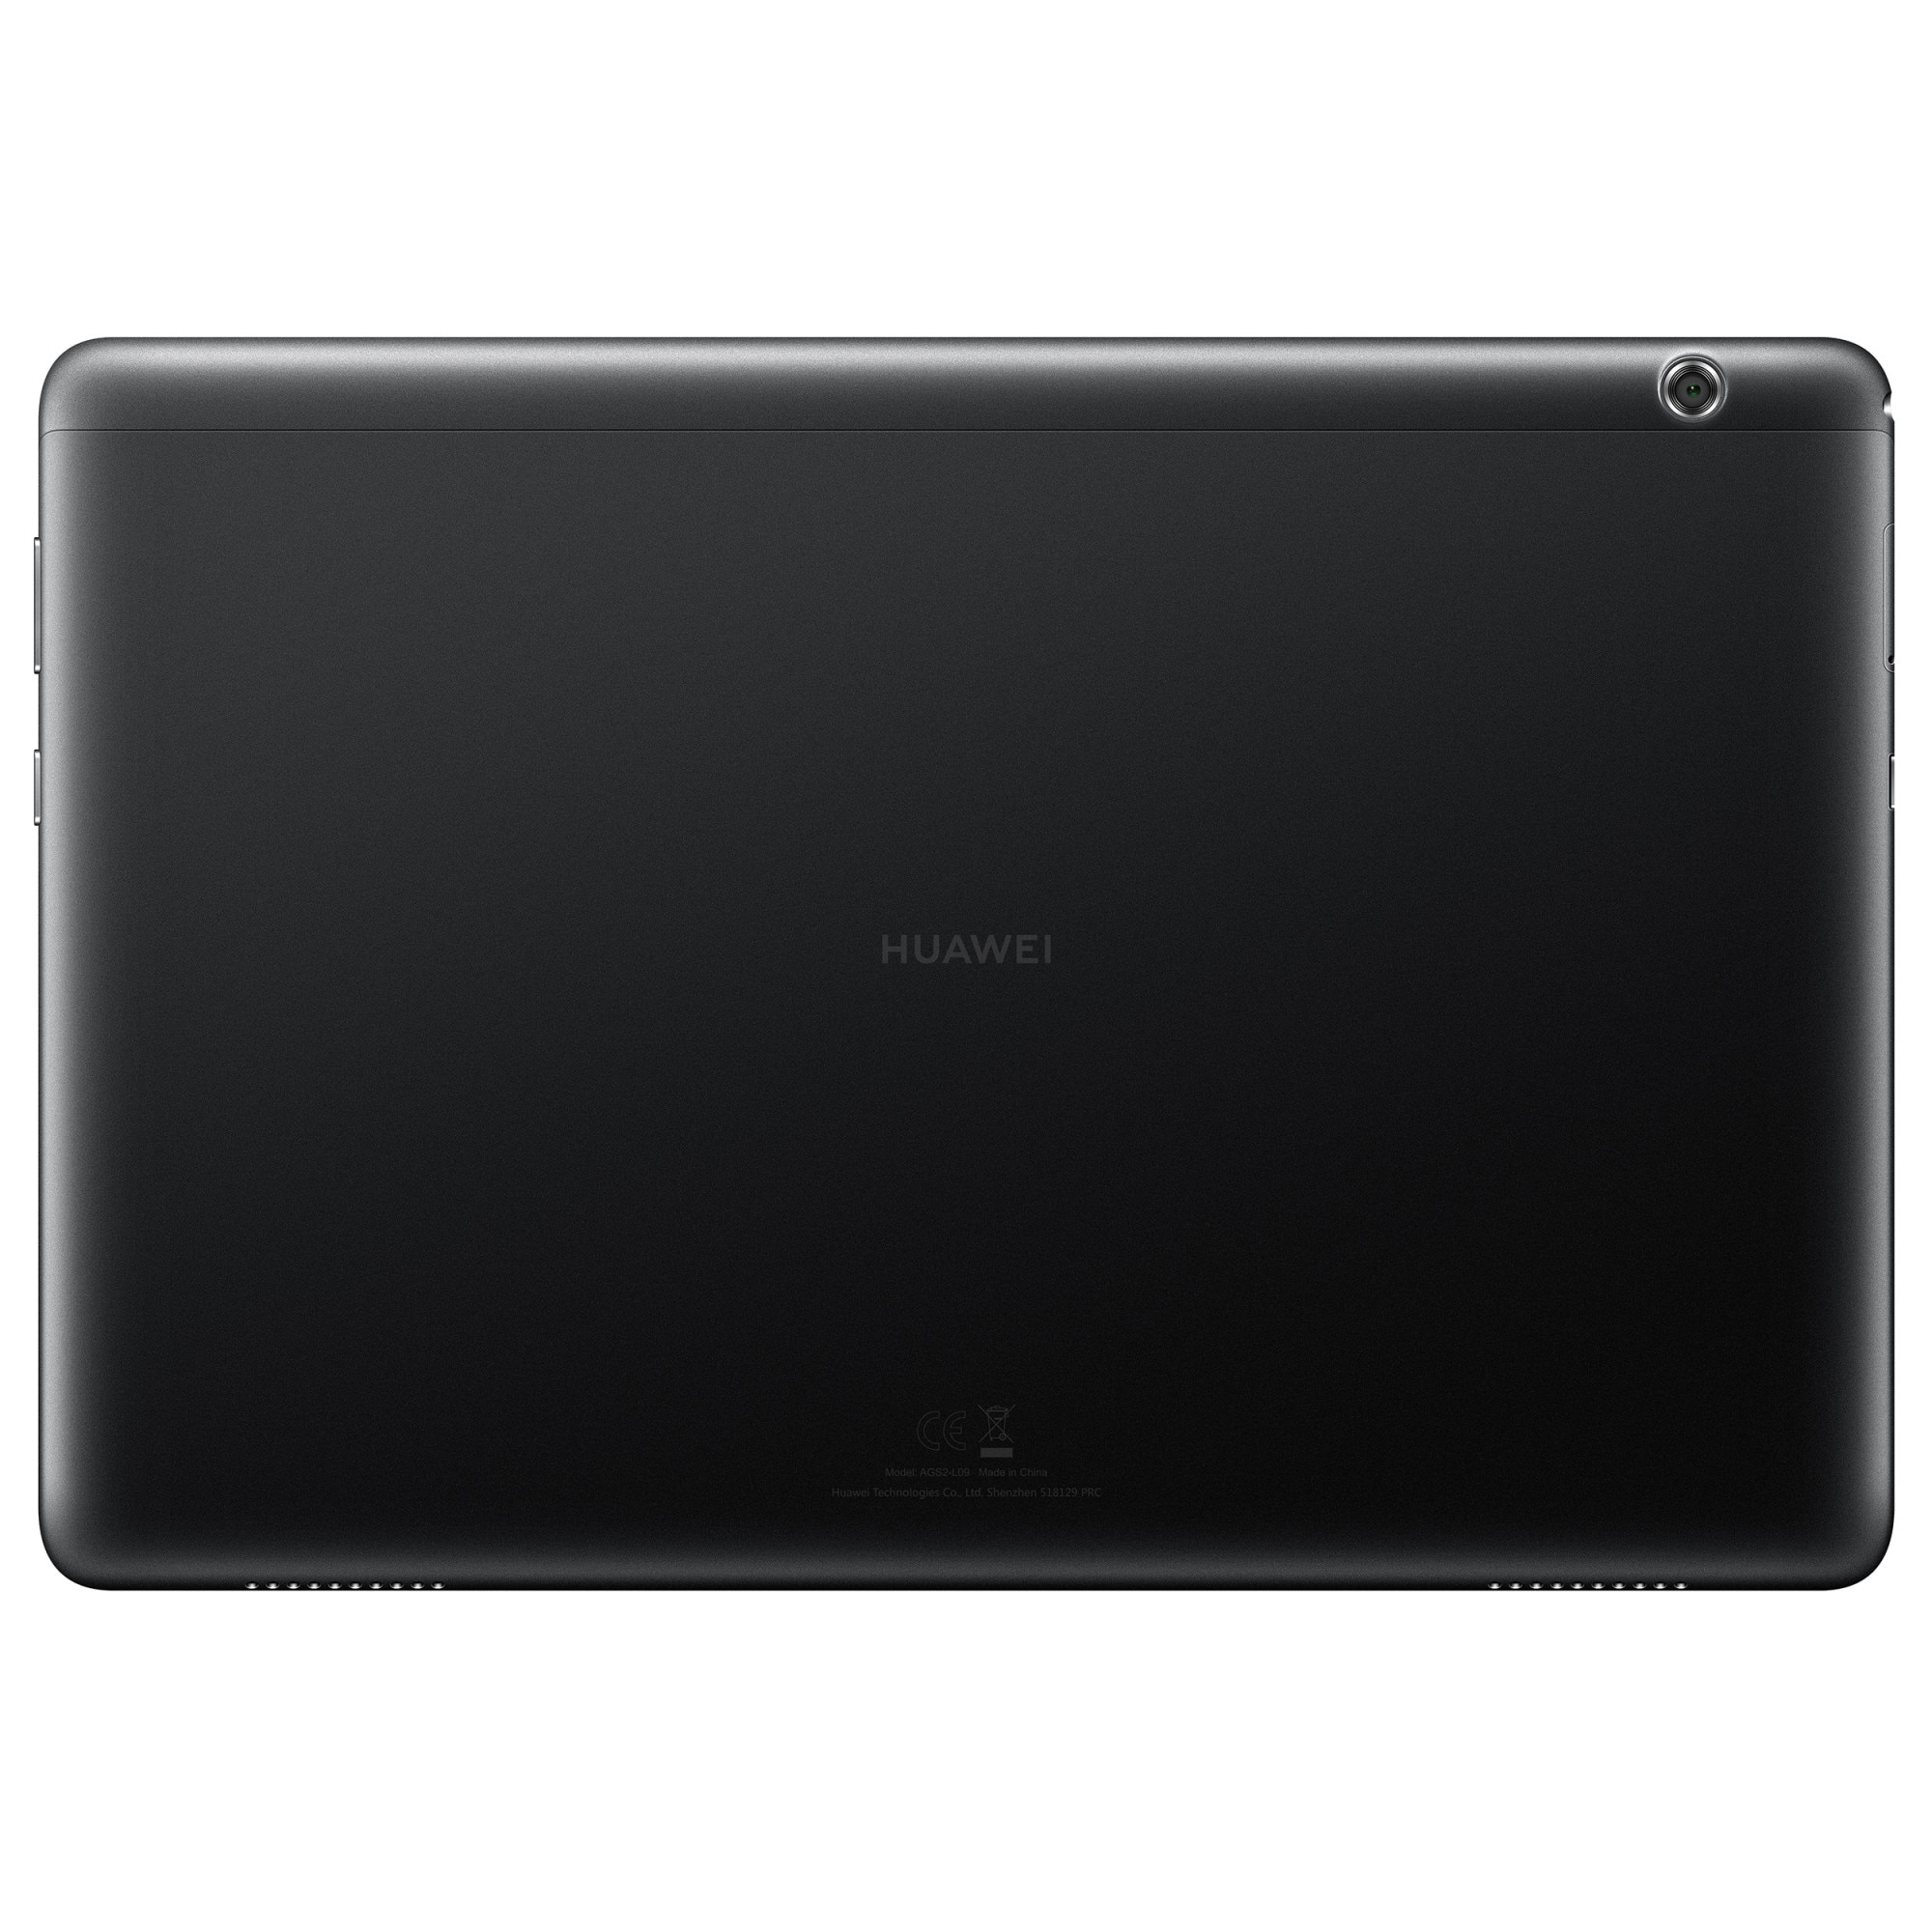  Huawei Mediapad T5 Tablet - 10.1 - 4 GB RAM - 64 GB SSD -  Android 8.0 Oreo - Black - Quad-core (4 Core) 2.36 GHz Quad-core (4 Core)  1.70 GHz - microSD Supported - 2 Megapixel Front Camera - 5 Megapi :  Electronics